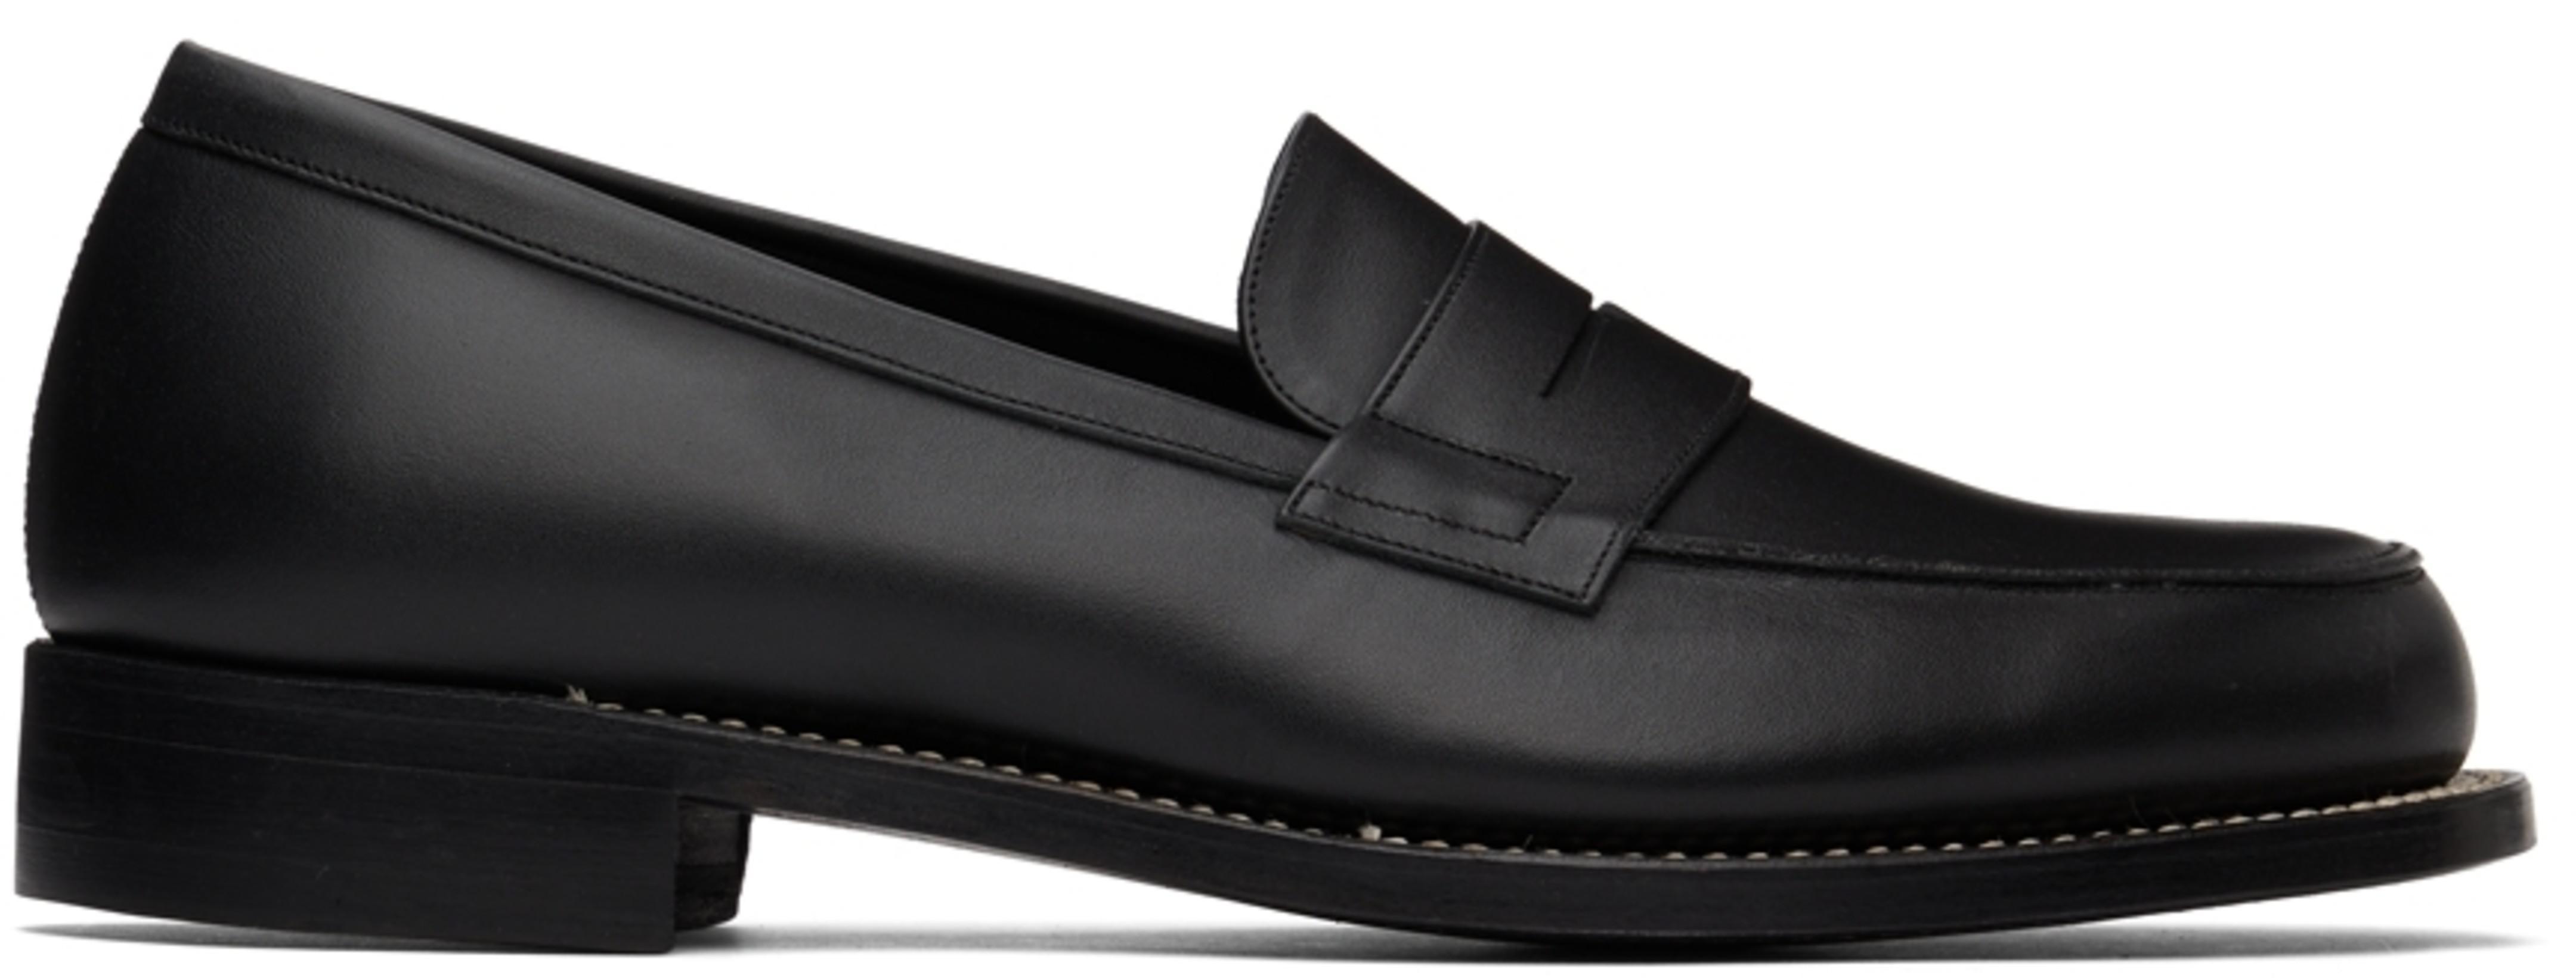 Black Coin Loafers by BED J.W. FORD